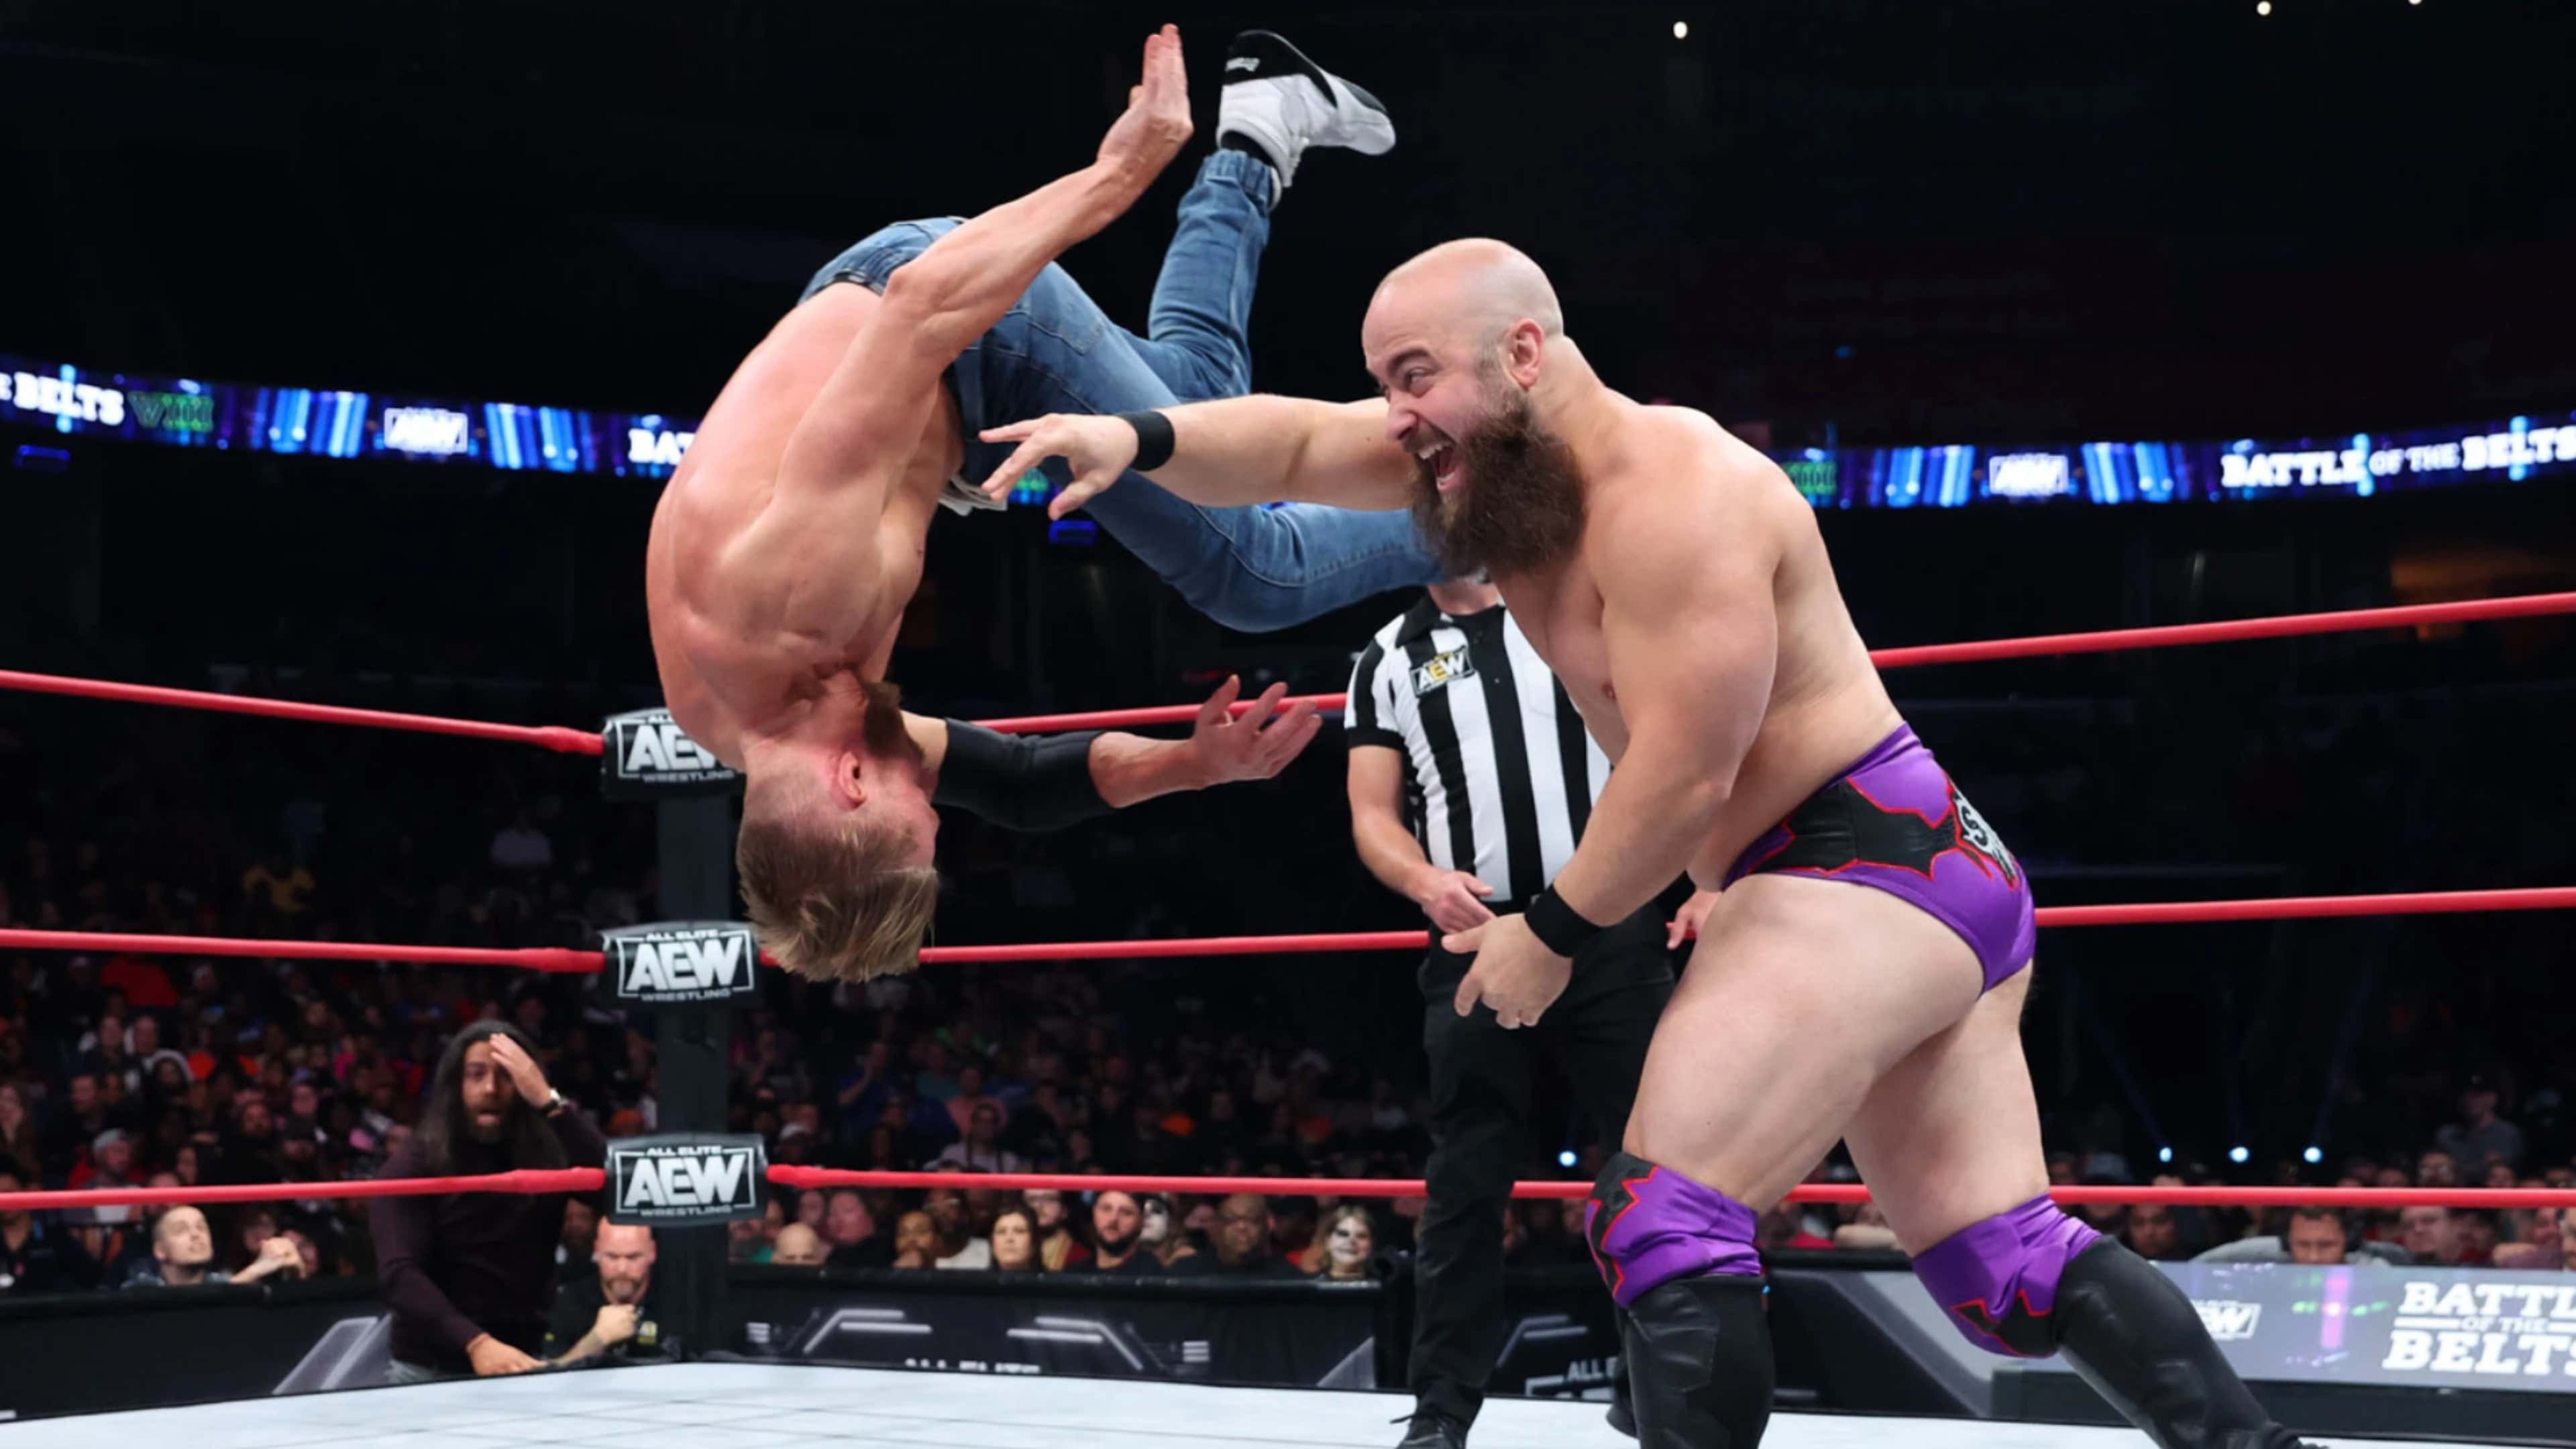 How to watch and live stream All Elite Wrestling in 2023